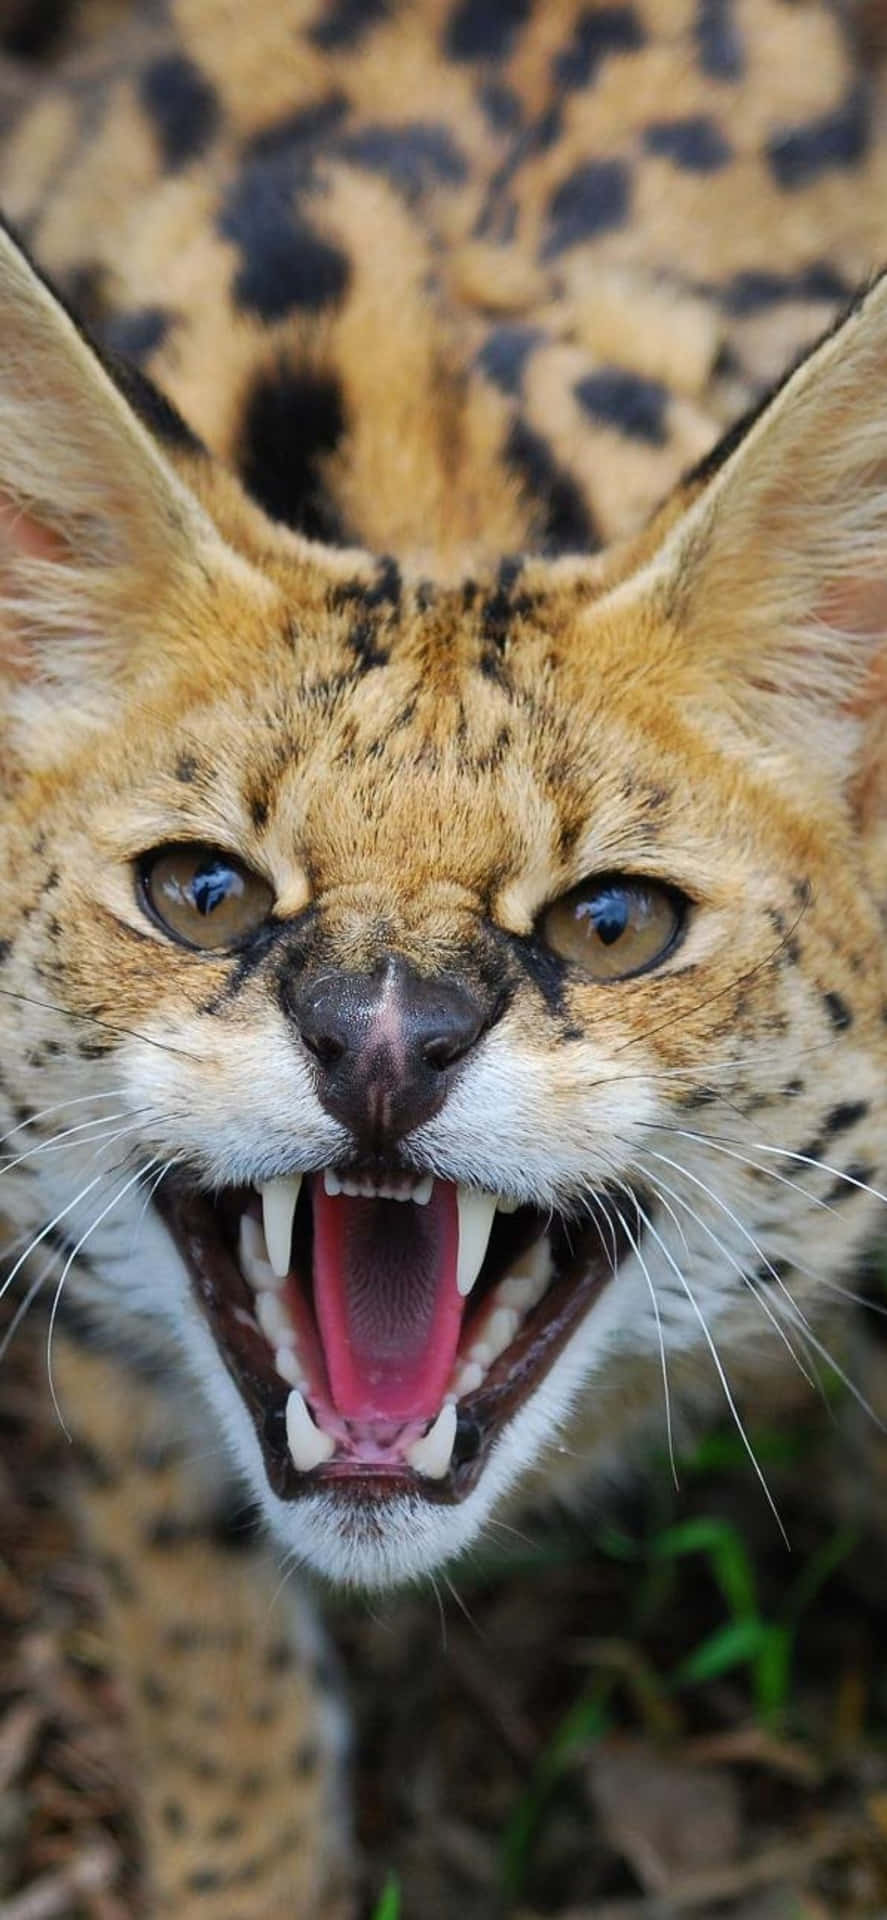 a close up of a saber-tooth cat with its mouth open